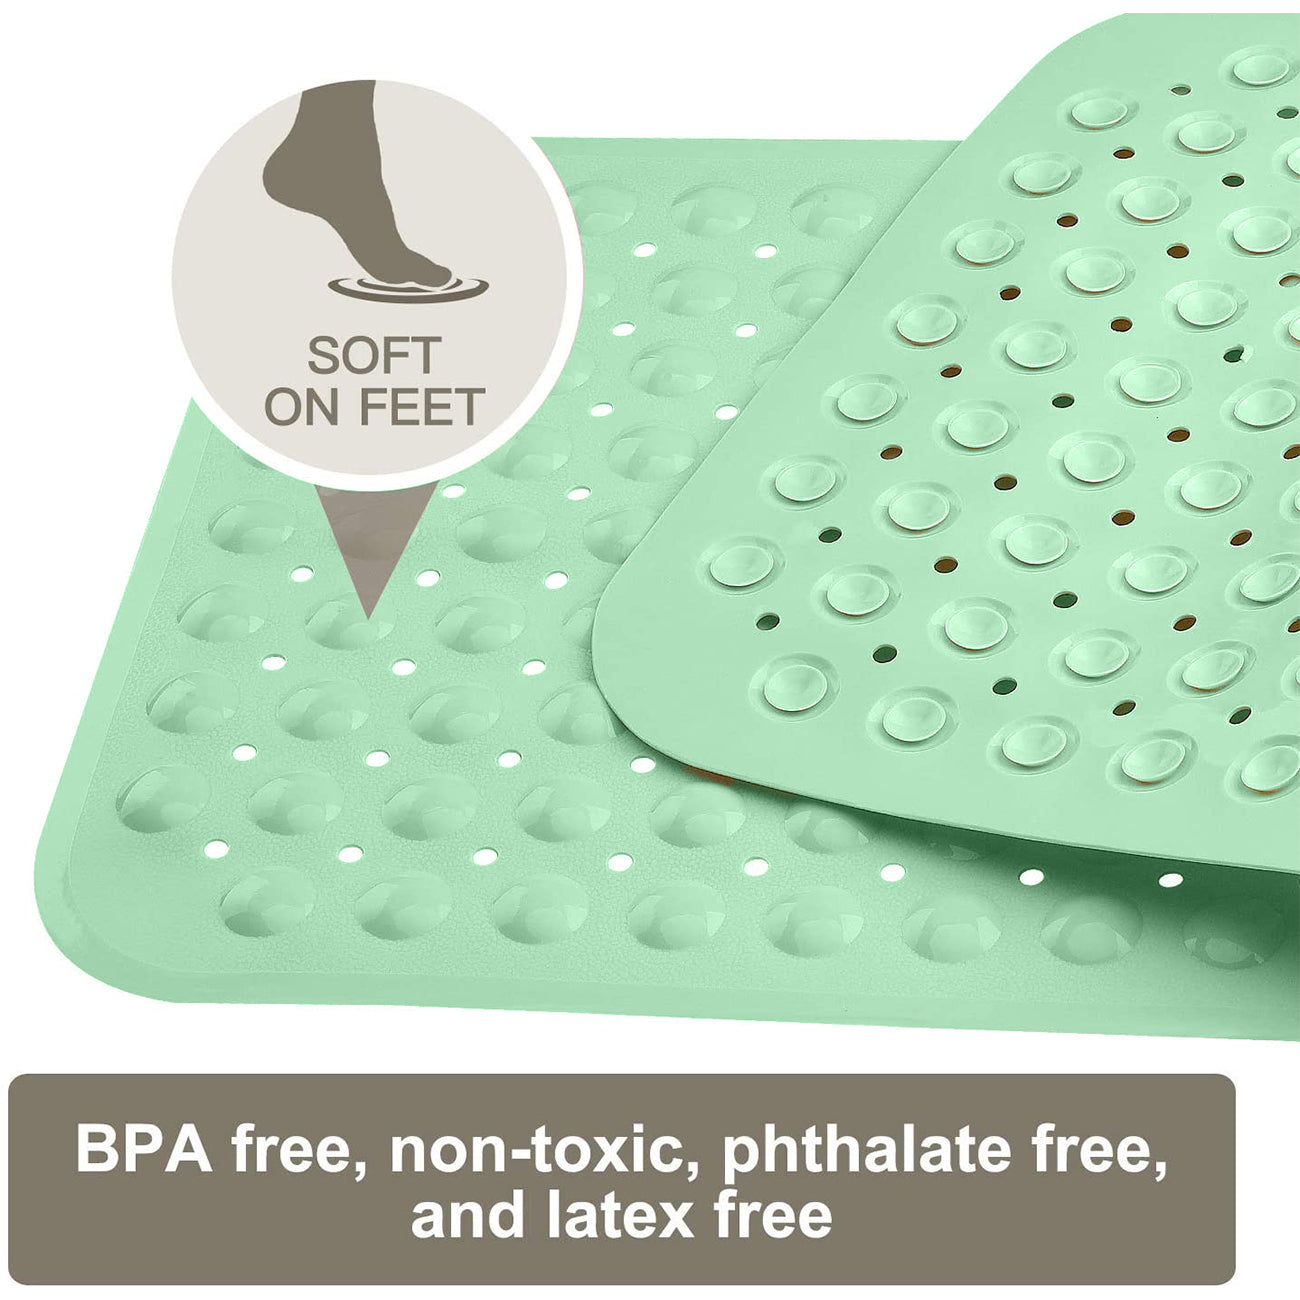 LifeKrafts Experia Anti-Slip with Suction Cup Bath Mat, 88x58cm (Green Color with Soft-Pebble) LifeKrafts